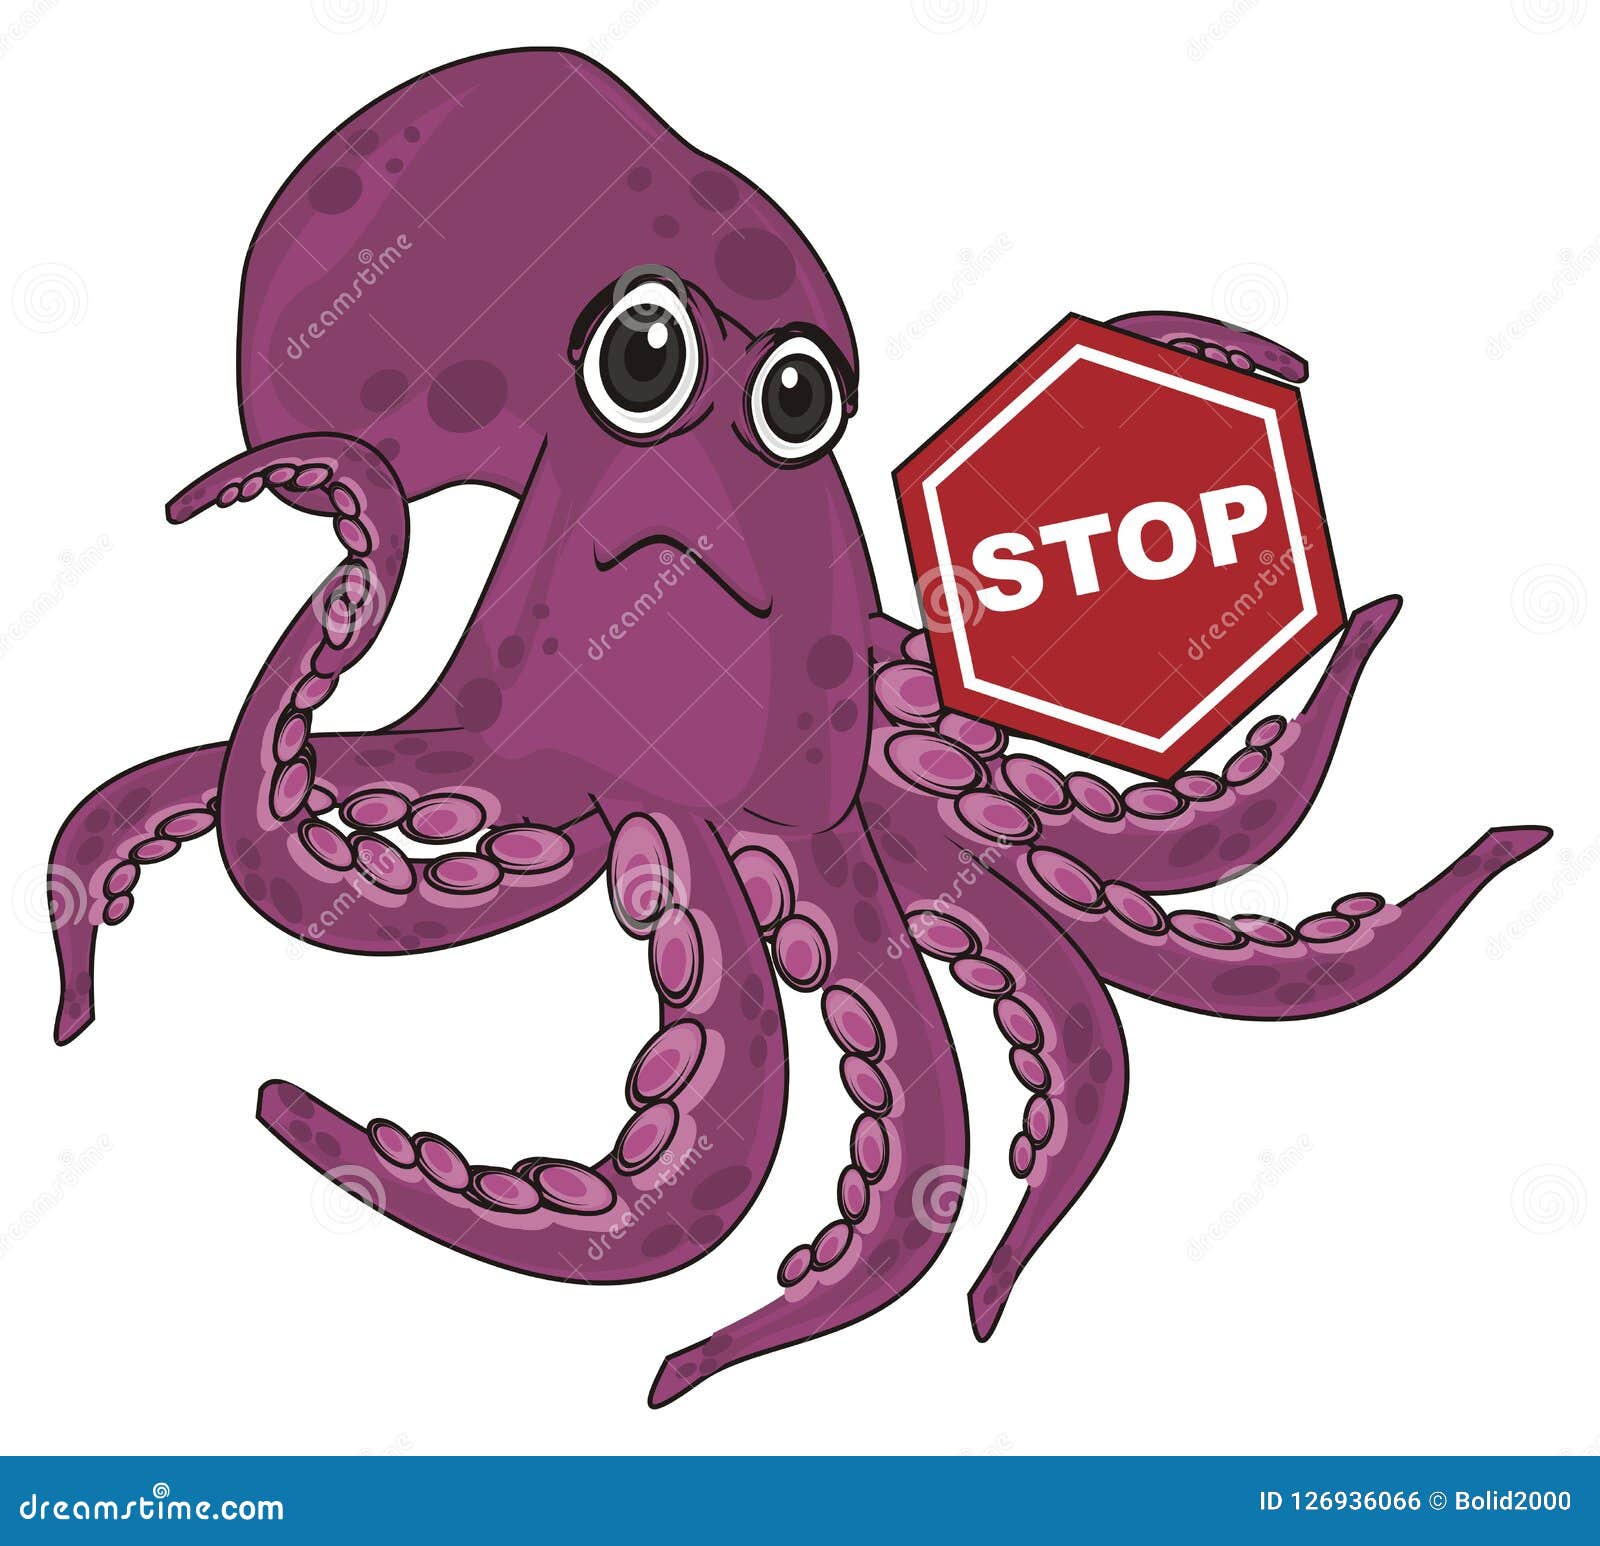 octopus and sign stop